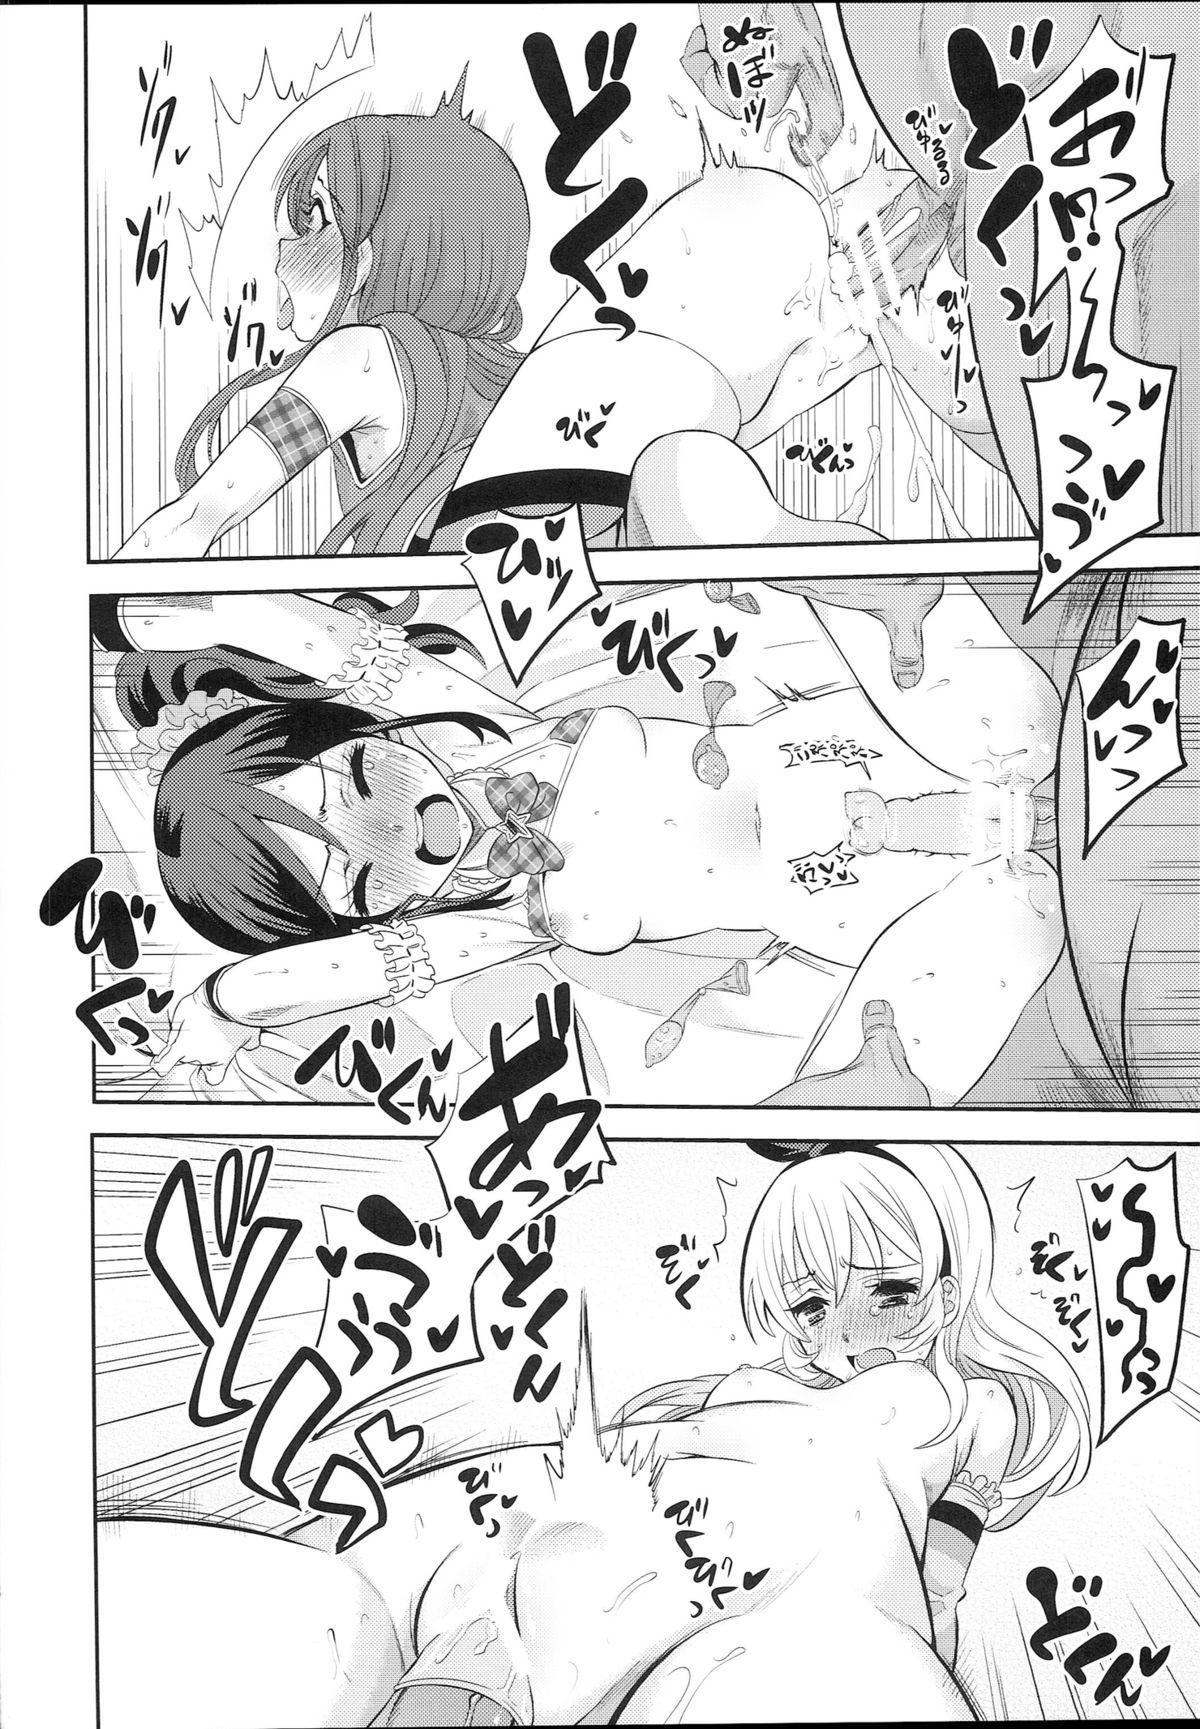 Tight IT WAS A good EXPERiENCE - Aikatsu Ass - Page 8